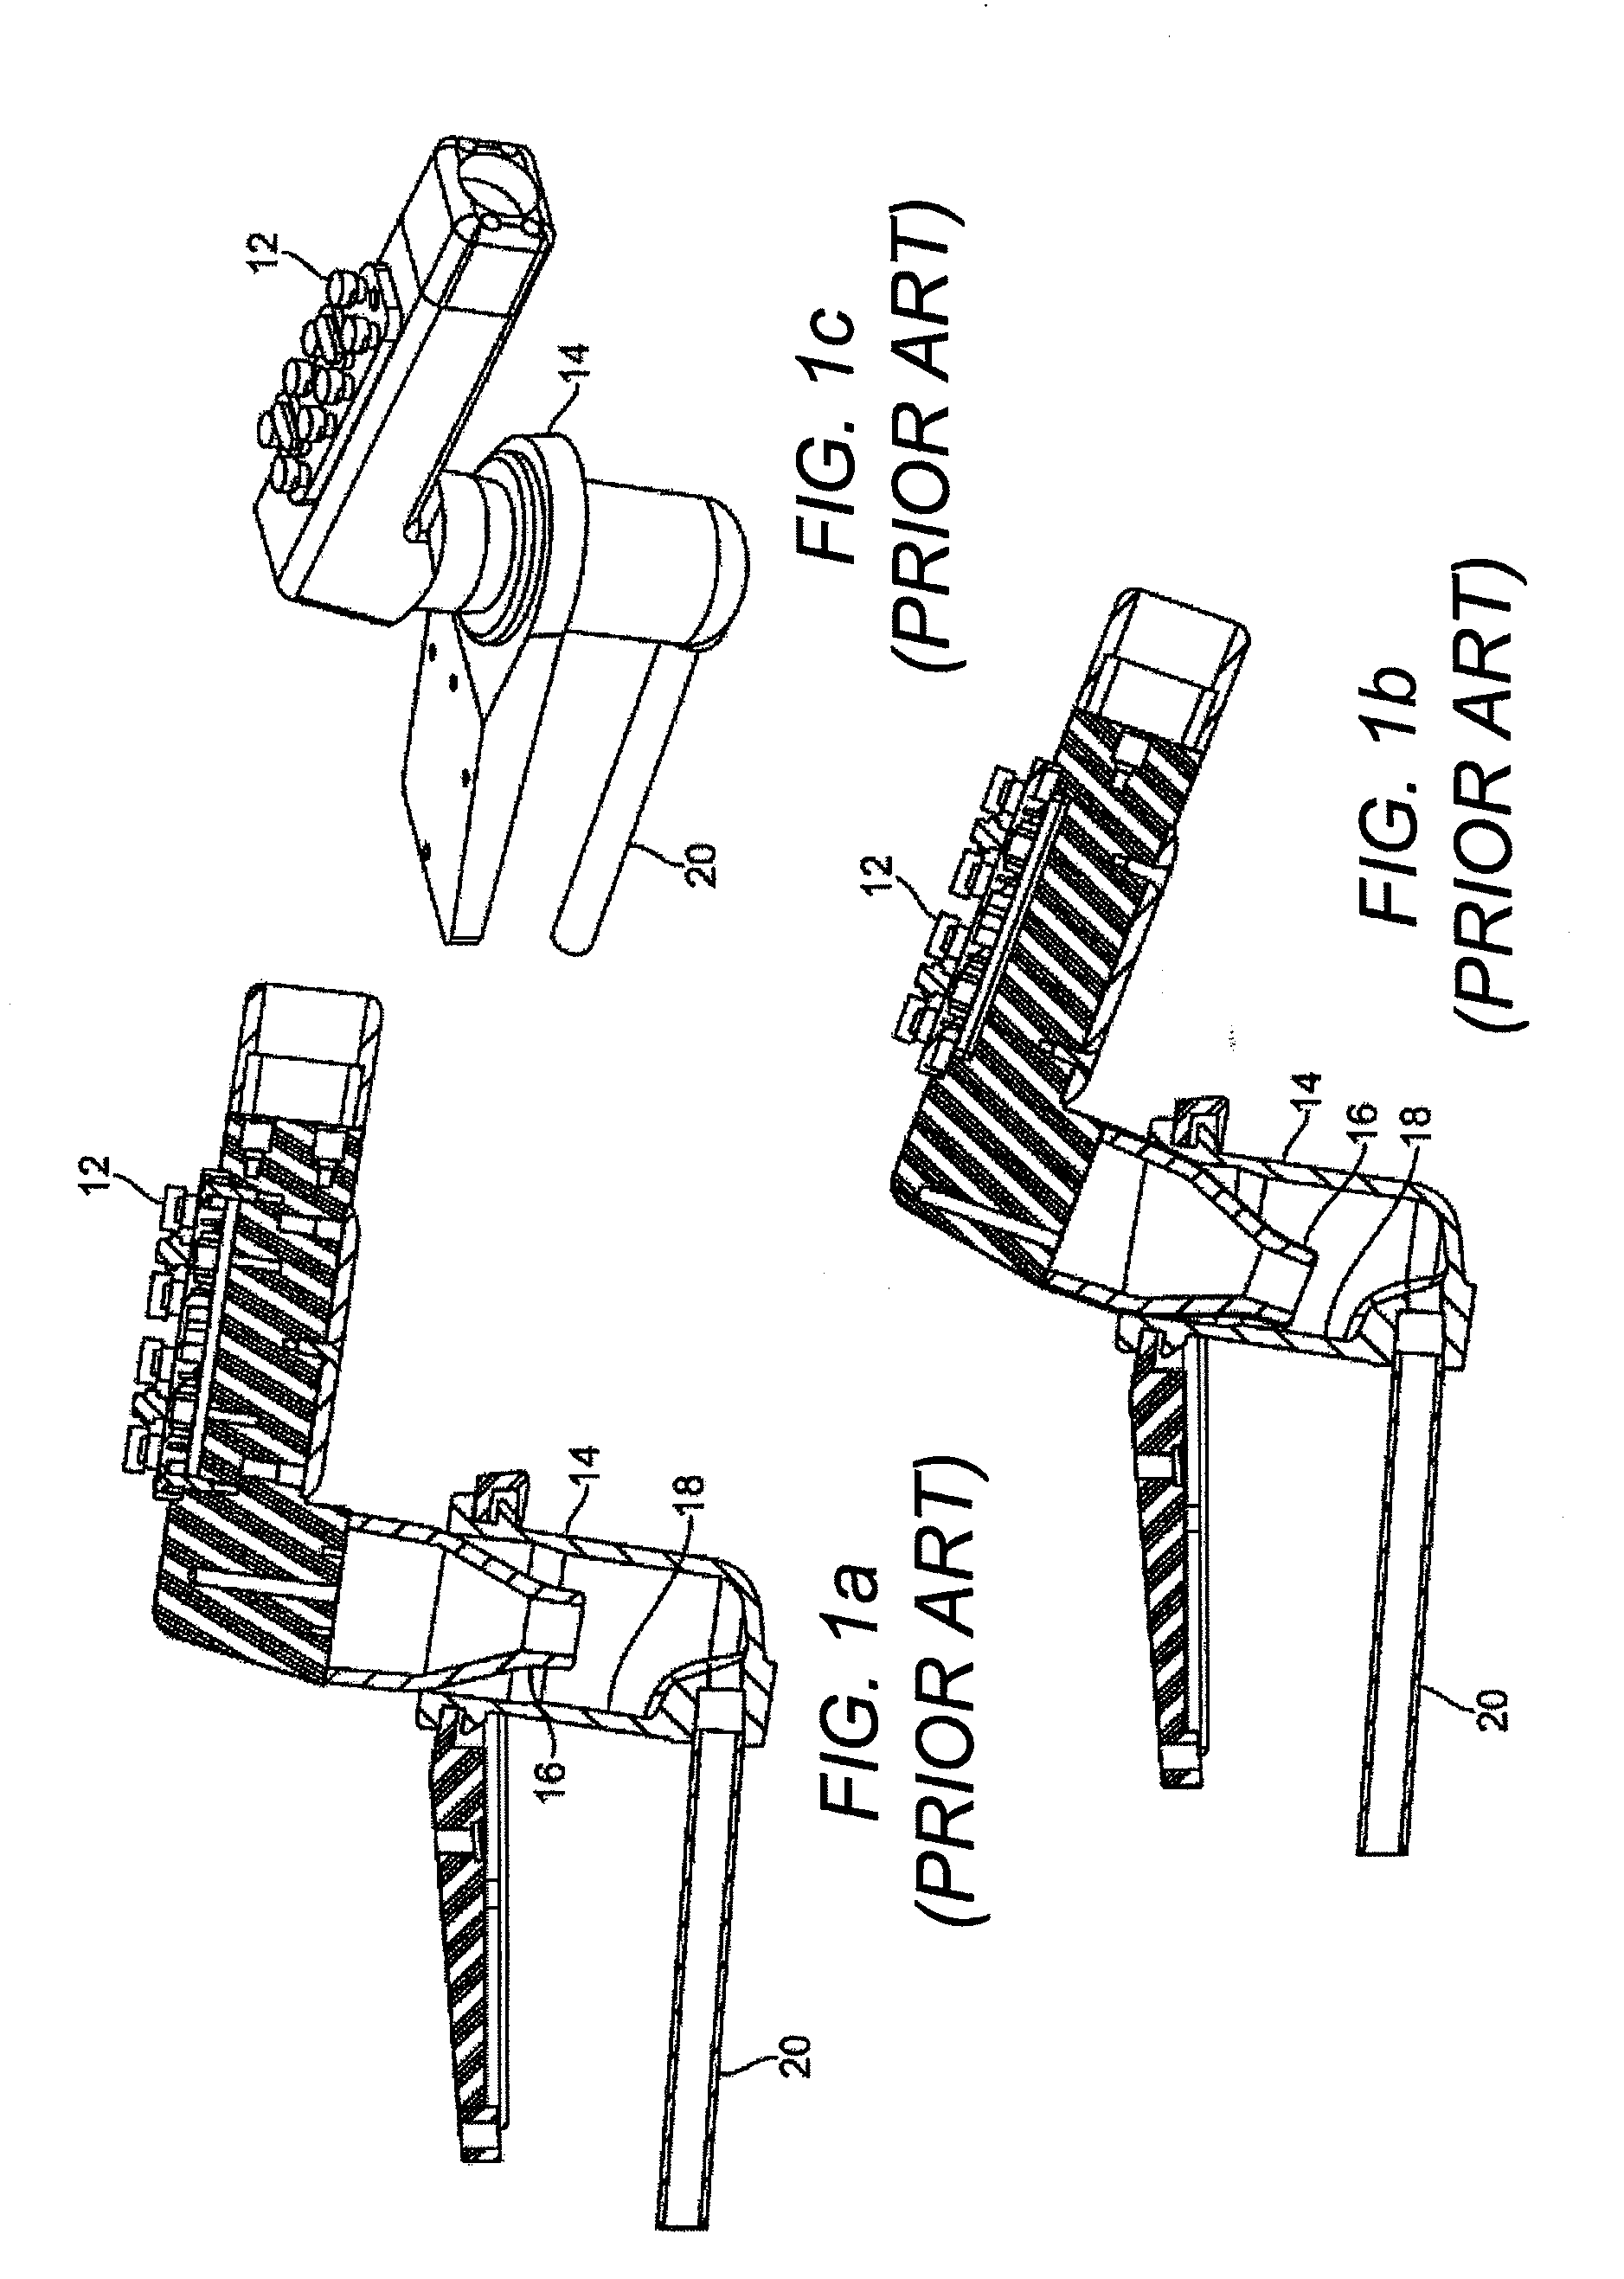 Ultraviolet disinfecting device for food and beverage dispensers